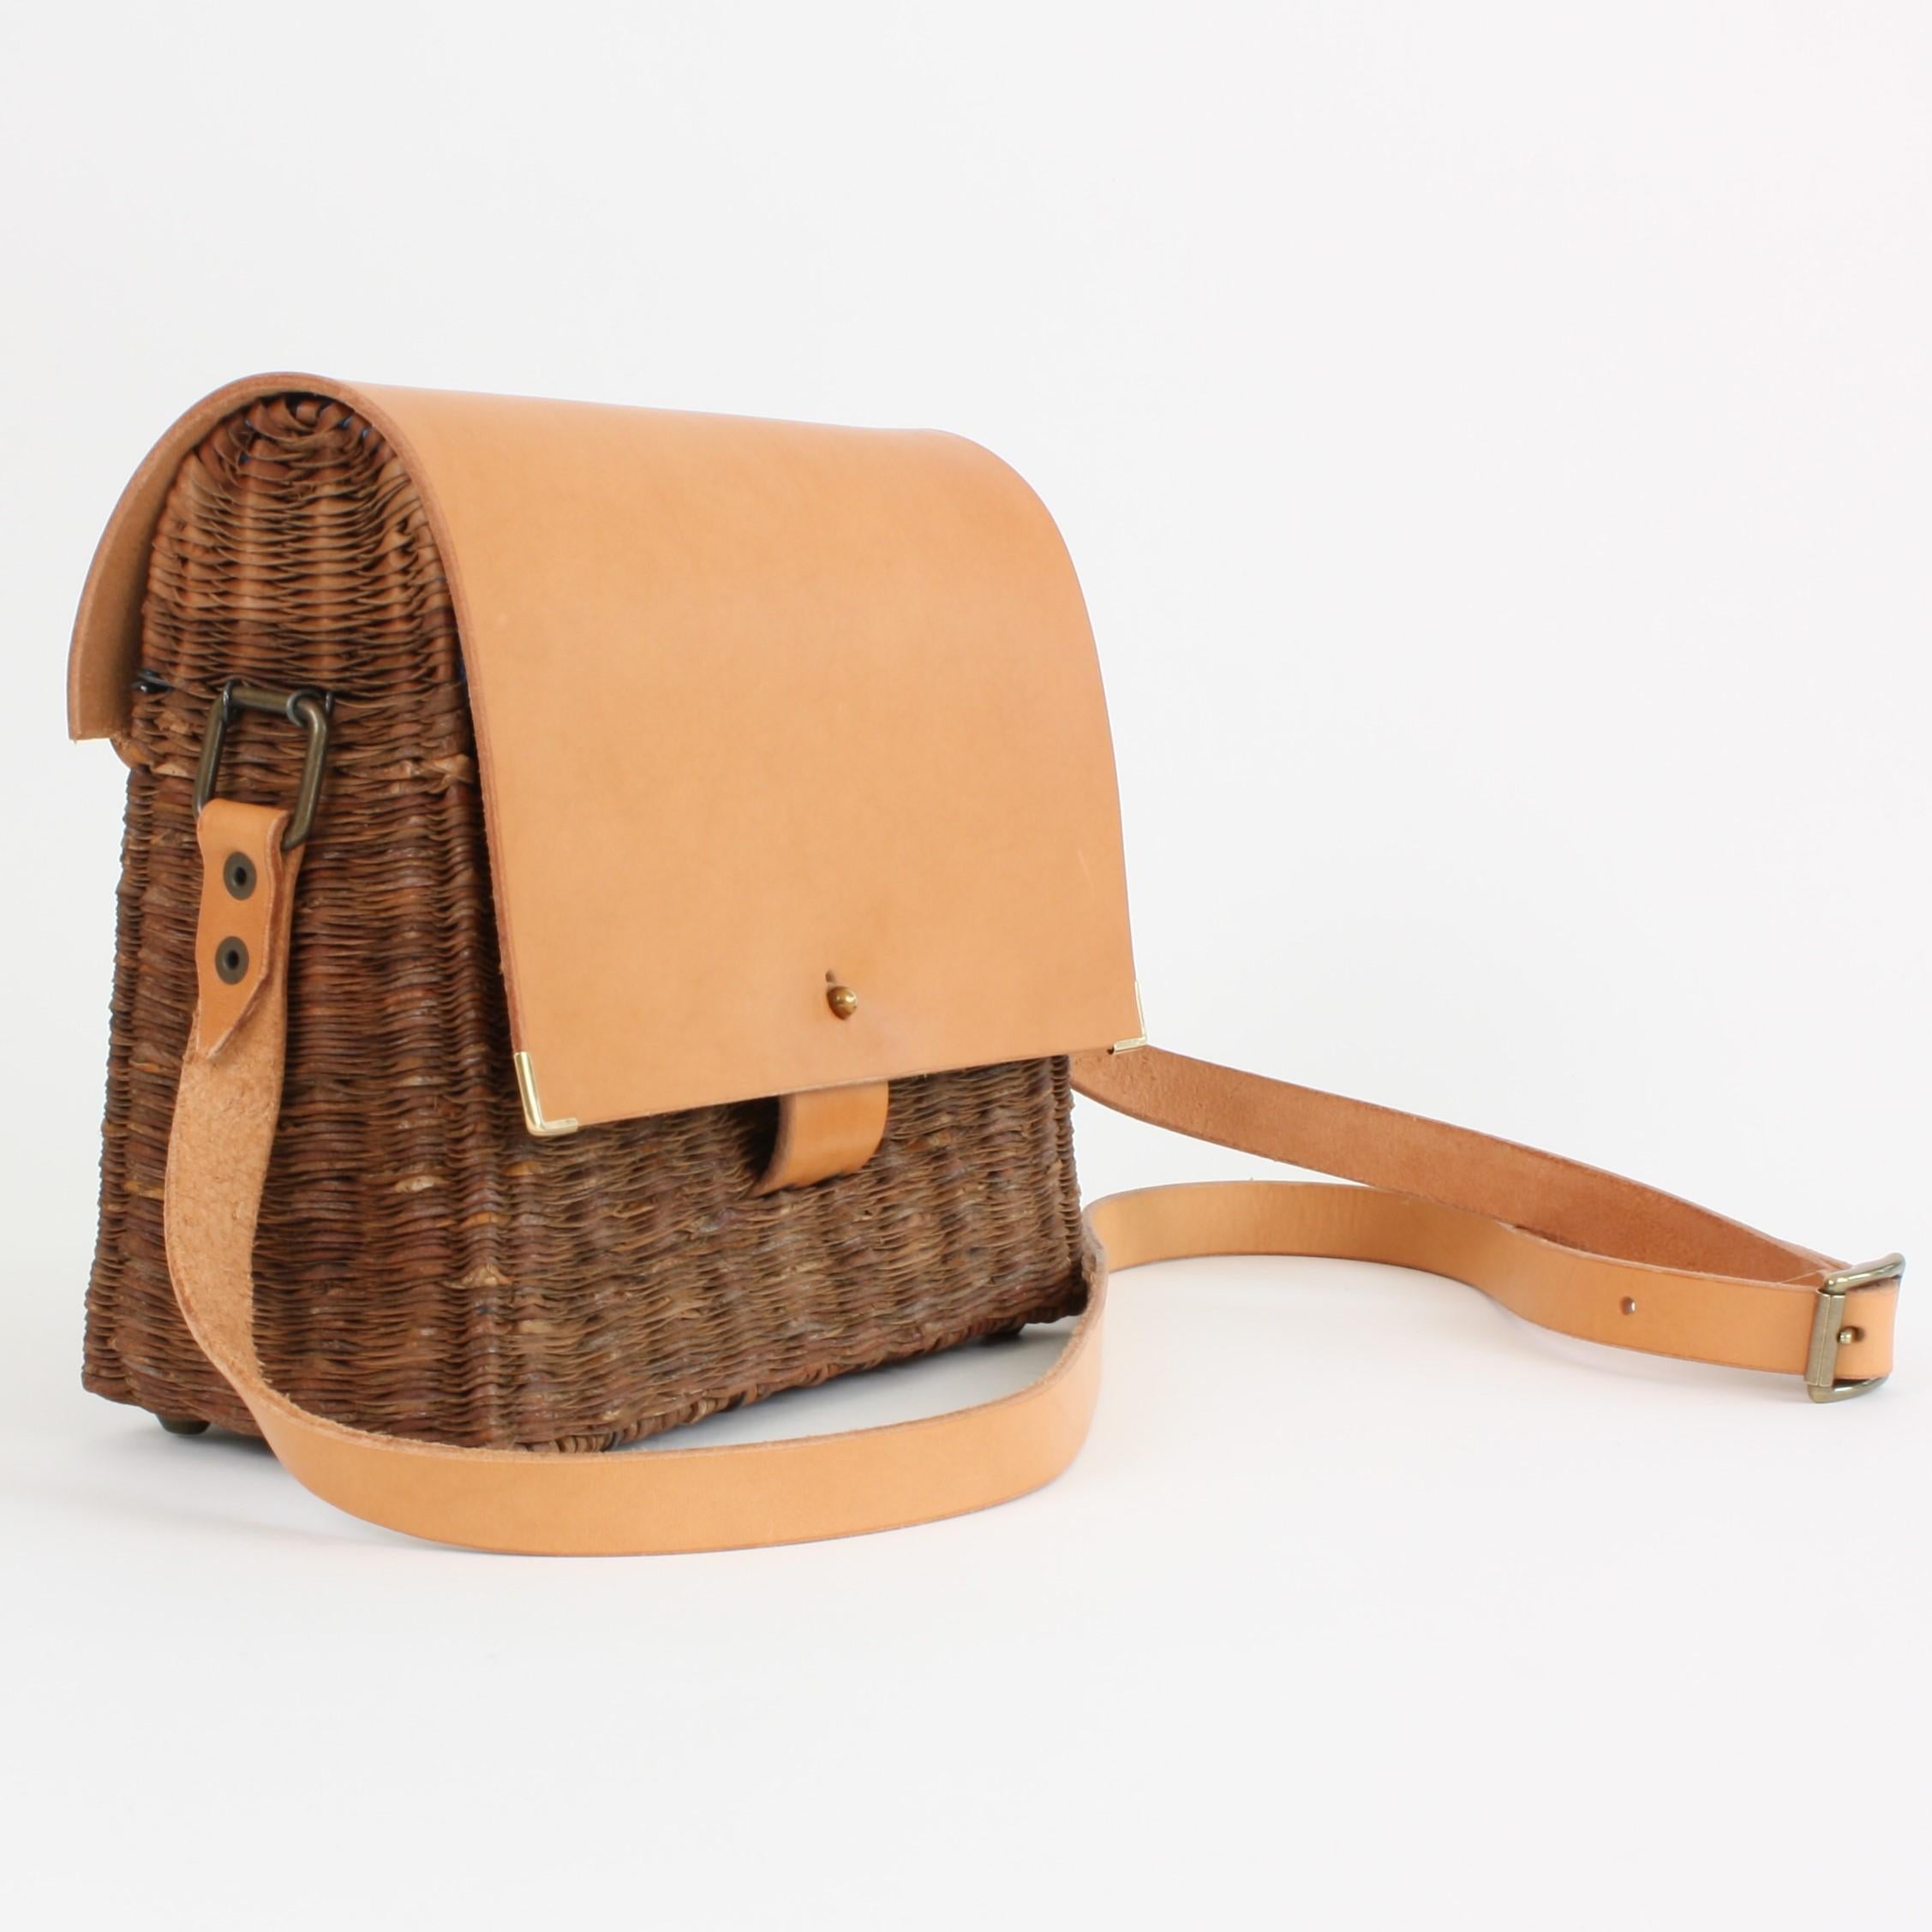 Stunning custom-made, woven handbag with taurillon leather and hand-dyed cotton lining. Woven from thin strips of the outer bark of willow branches, chosen for their rich texture and their warm palette of browns, greens and coppery mahogany tones.